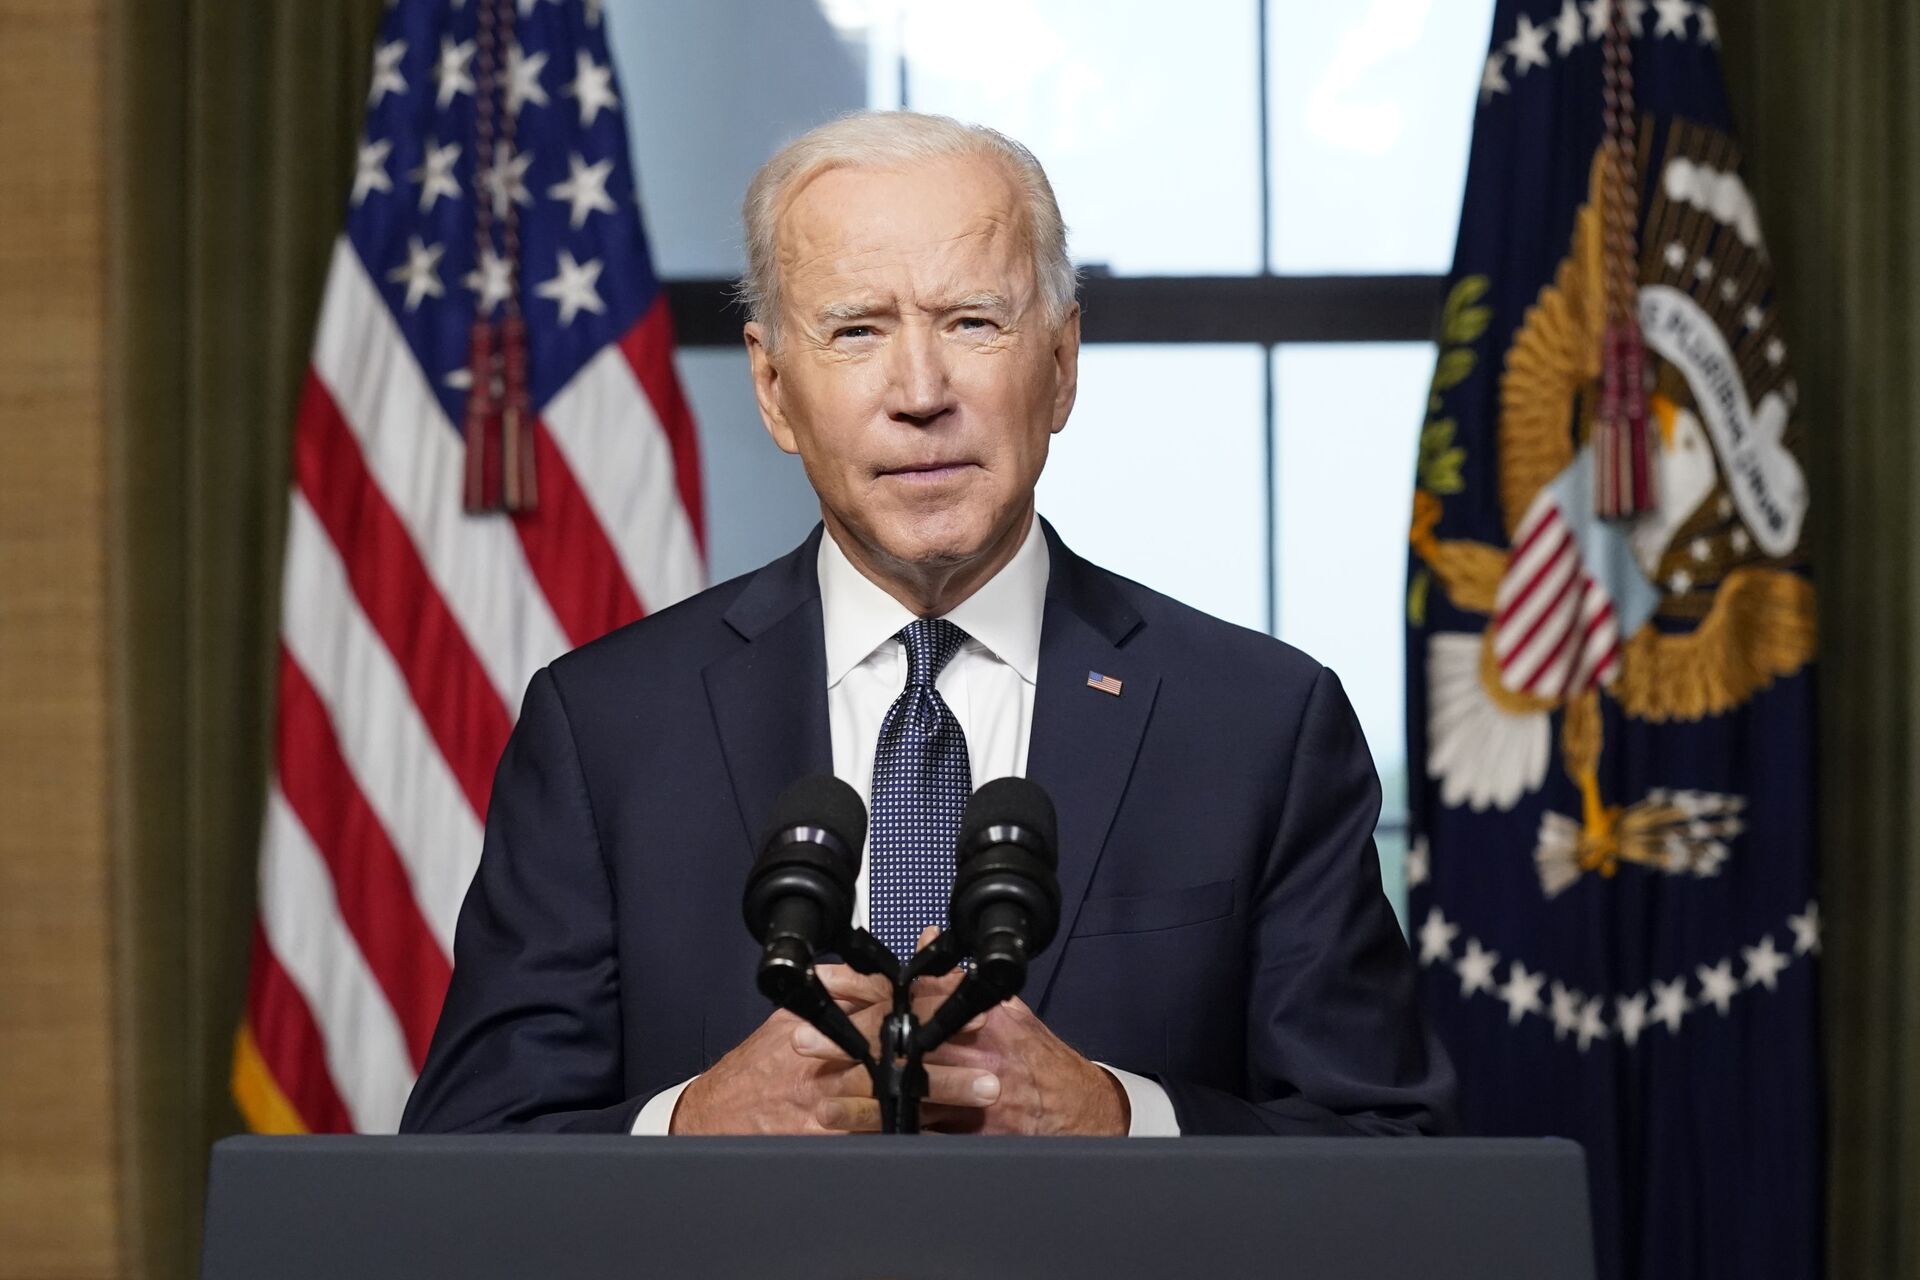 Biden Reportedly Stood Firm on Afghanistan Troop Pullout After Carefully Weighing 'Military's Input' - Sputnik International, 1920, 18.04.2021